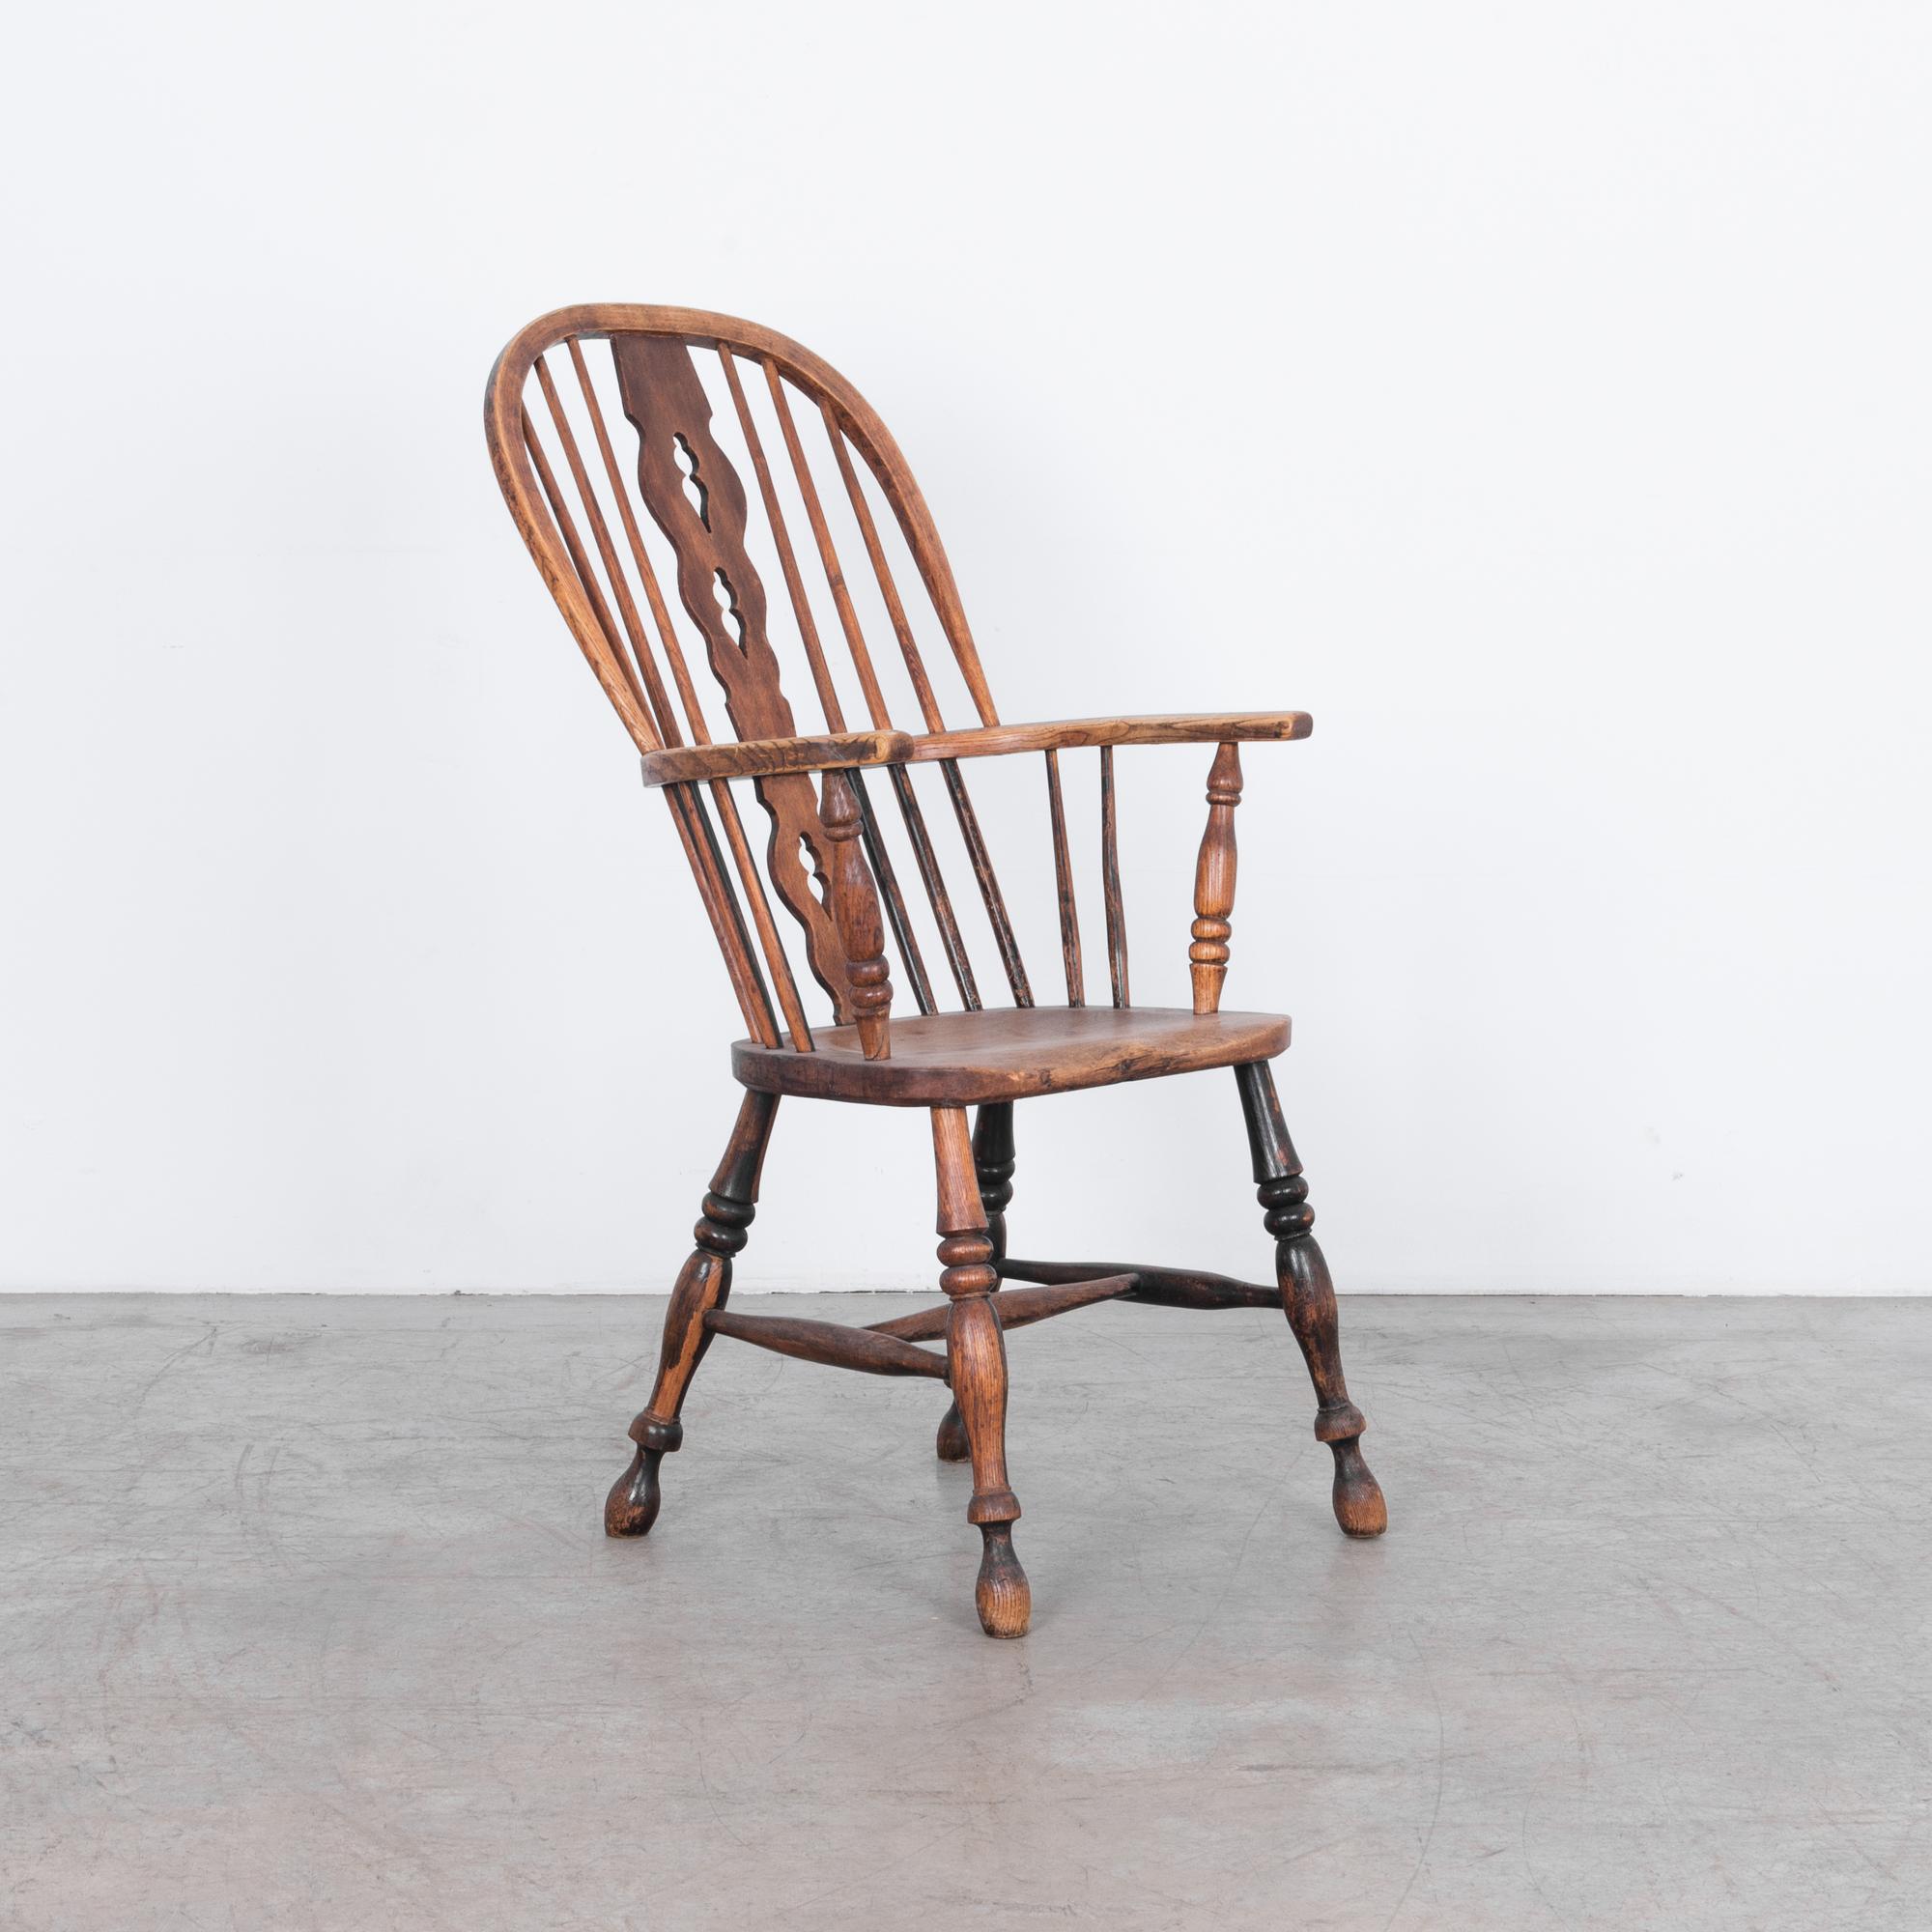 Gorgeous antique Windsor chair with unique pierced splat, ash frame with elm seat. A worn patina reminds us of its years of loving use. Expertly crafted by traditional artisans, a future heirloom.